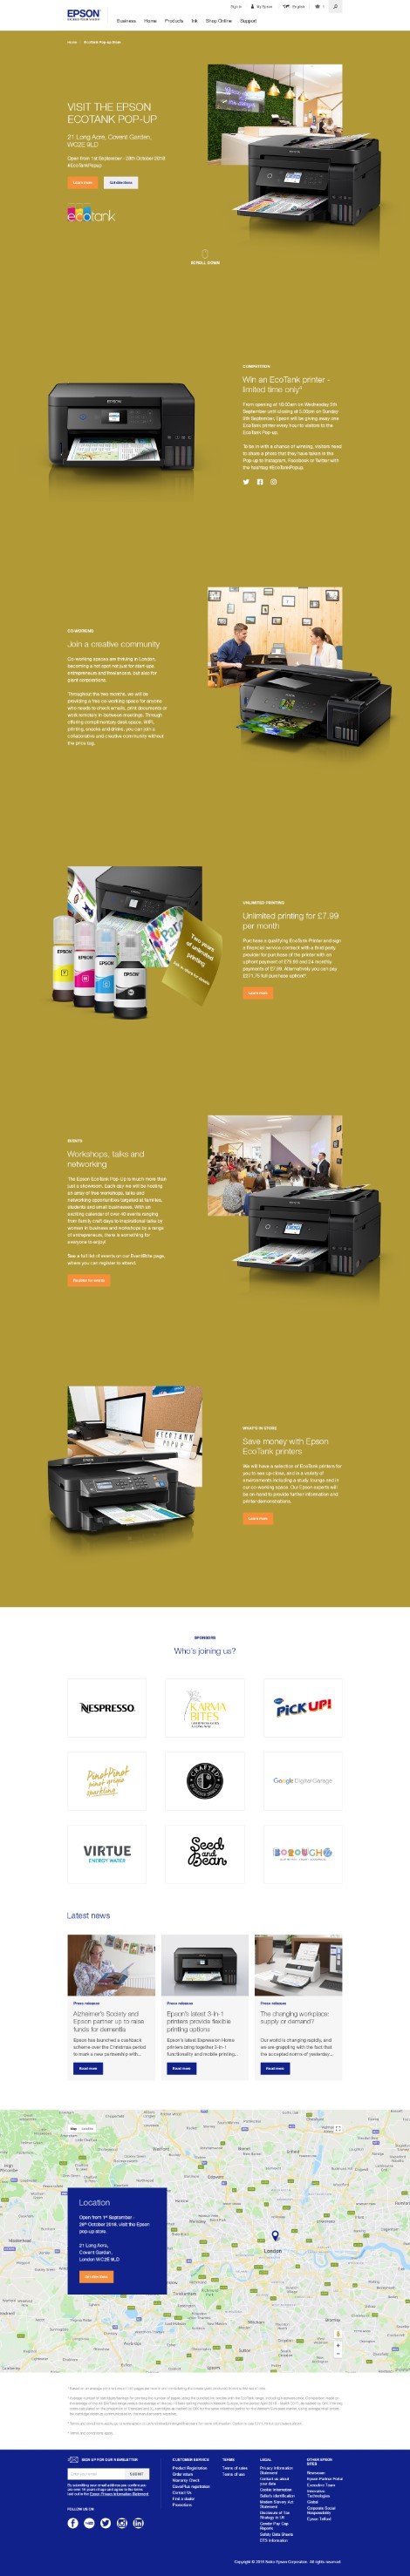 Epson Popup Store Campaign landing page